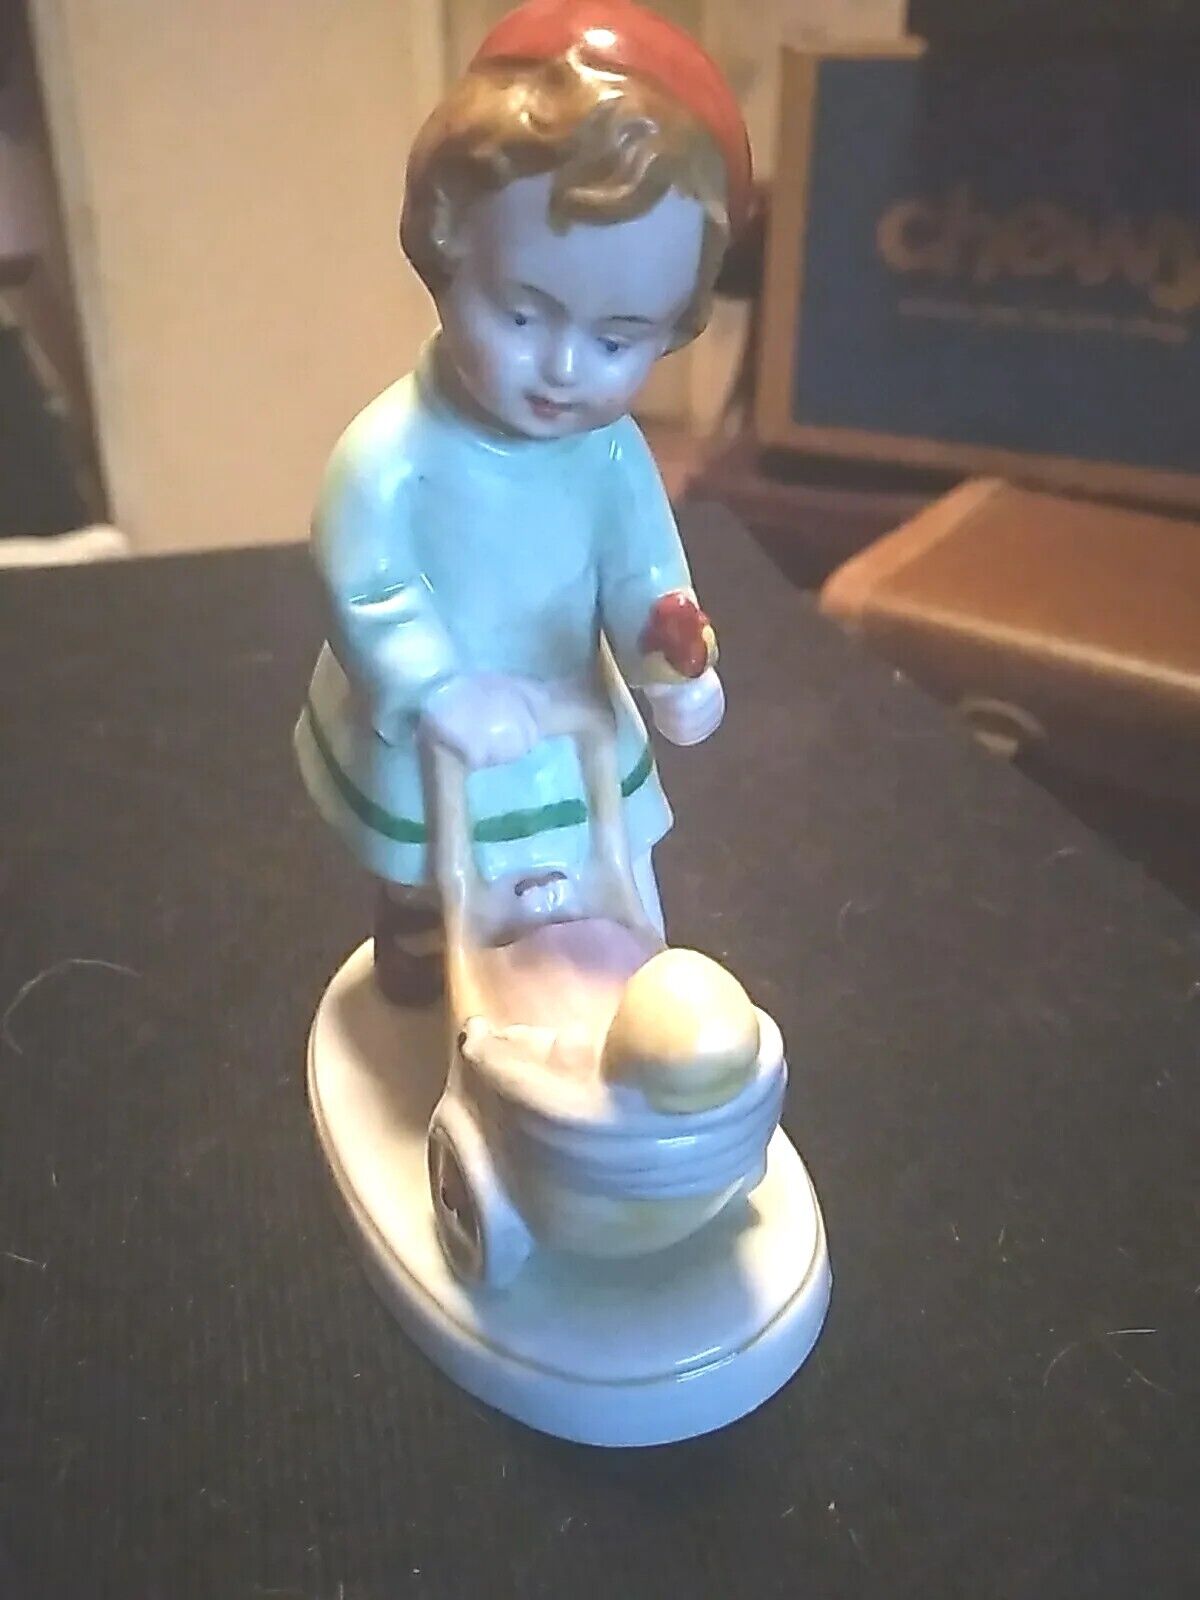 RARE Figurine “GIRL PLAYS WITH DOLL” Scheibe-Alsbac Germany Porcelain